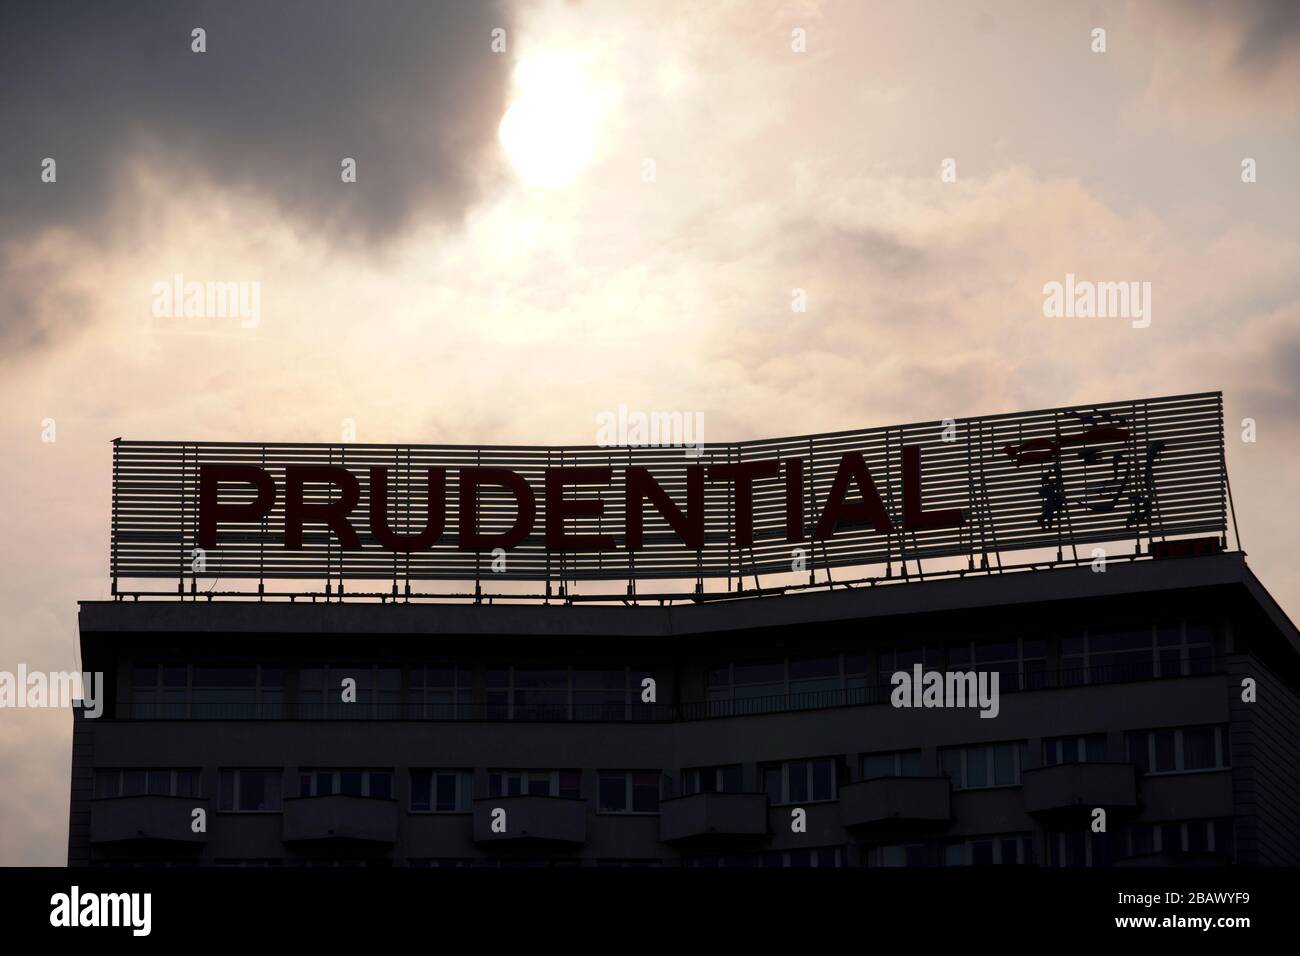 A sign advertising the Prudential insurance company is seen on top of a residential building in Warsaw, Poland on March 29, 2020. On March 24 the Polish government announced further restrictions on personal movement after already having closed schools, bars and restaurants in addition to closing the borders to foreigners. Gatherings of more than two people are banned in public until April 11. Despite stricter measures the ruling Law and Justice party has amended electoral rules so that the May 10 Presidential elections will stay in place. (Photo by Jaap Arriens/Sipa USA) Stock Photo